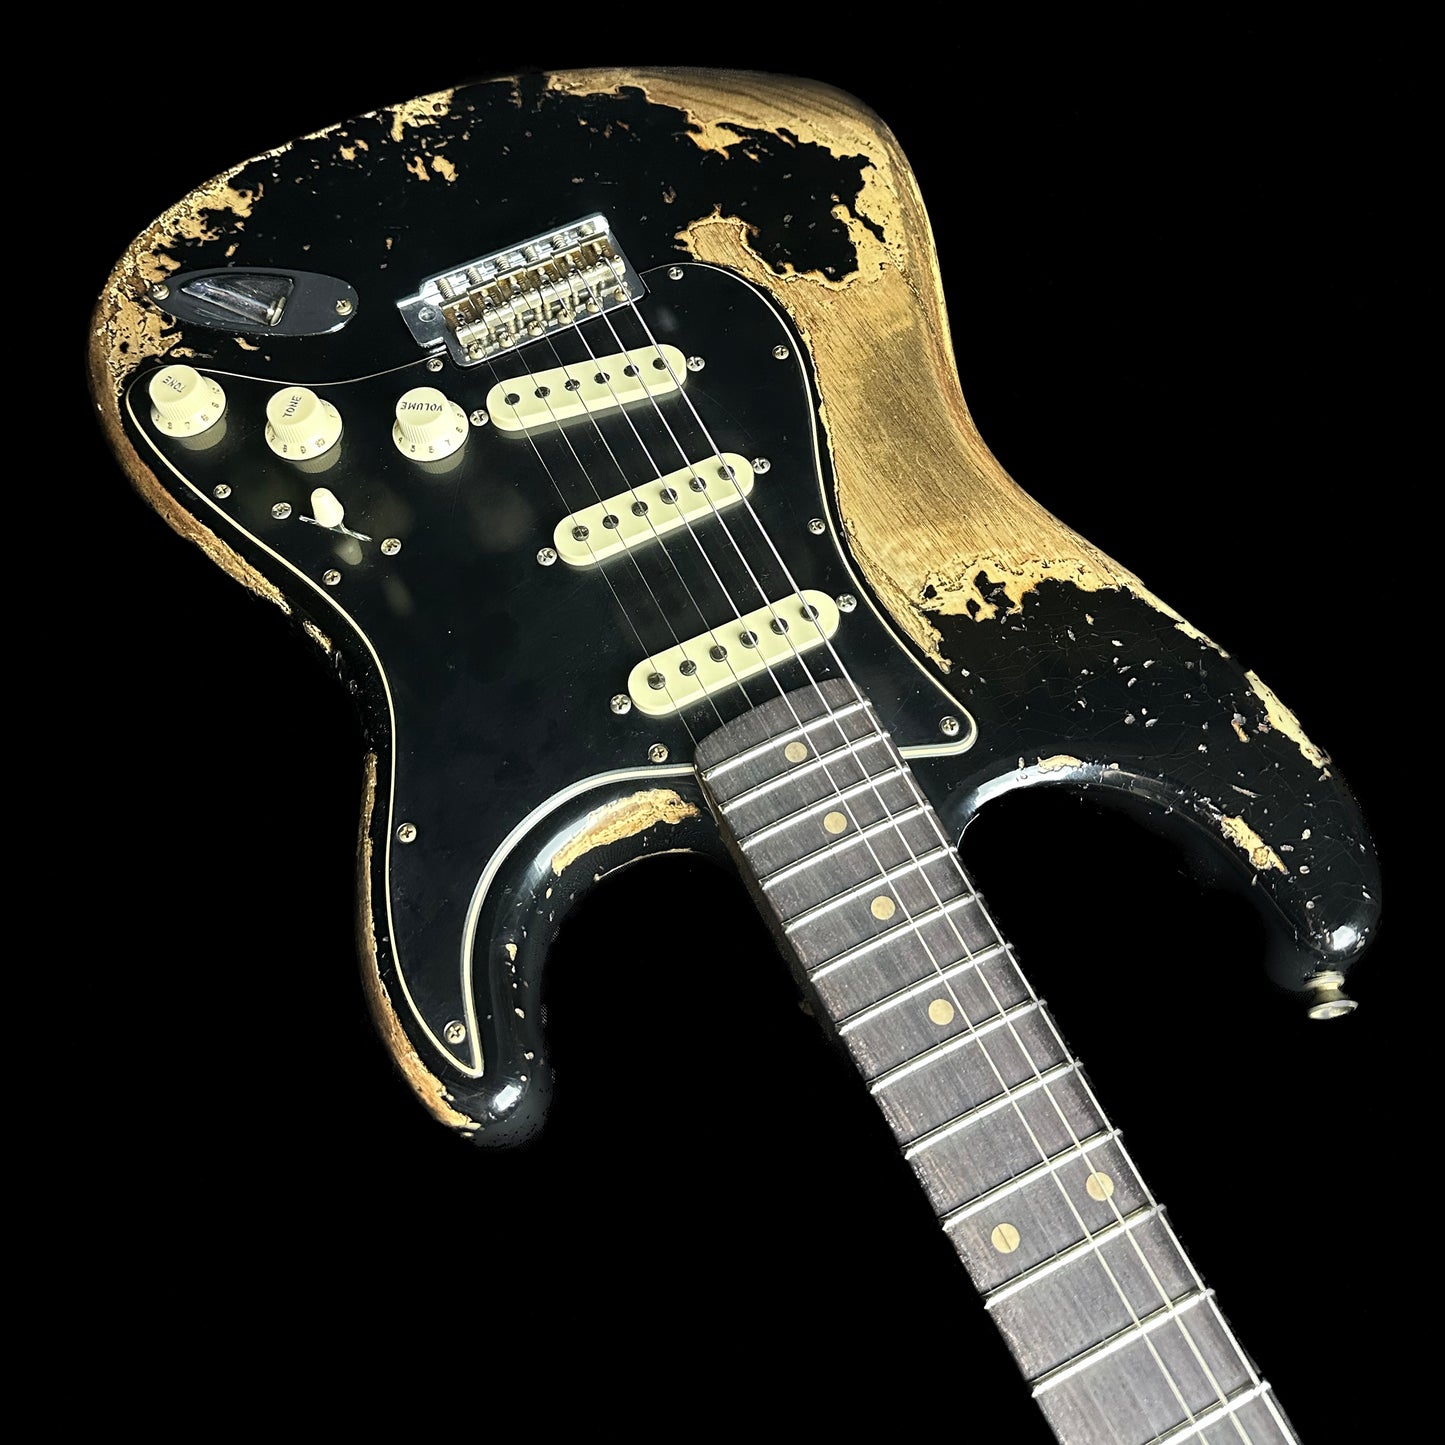 Upside down angle of Fender Custom Shop Limited Edition Poblano Stratocaster Super Heavy Relic Aged Black.